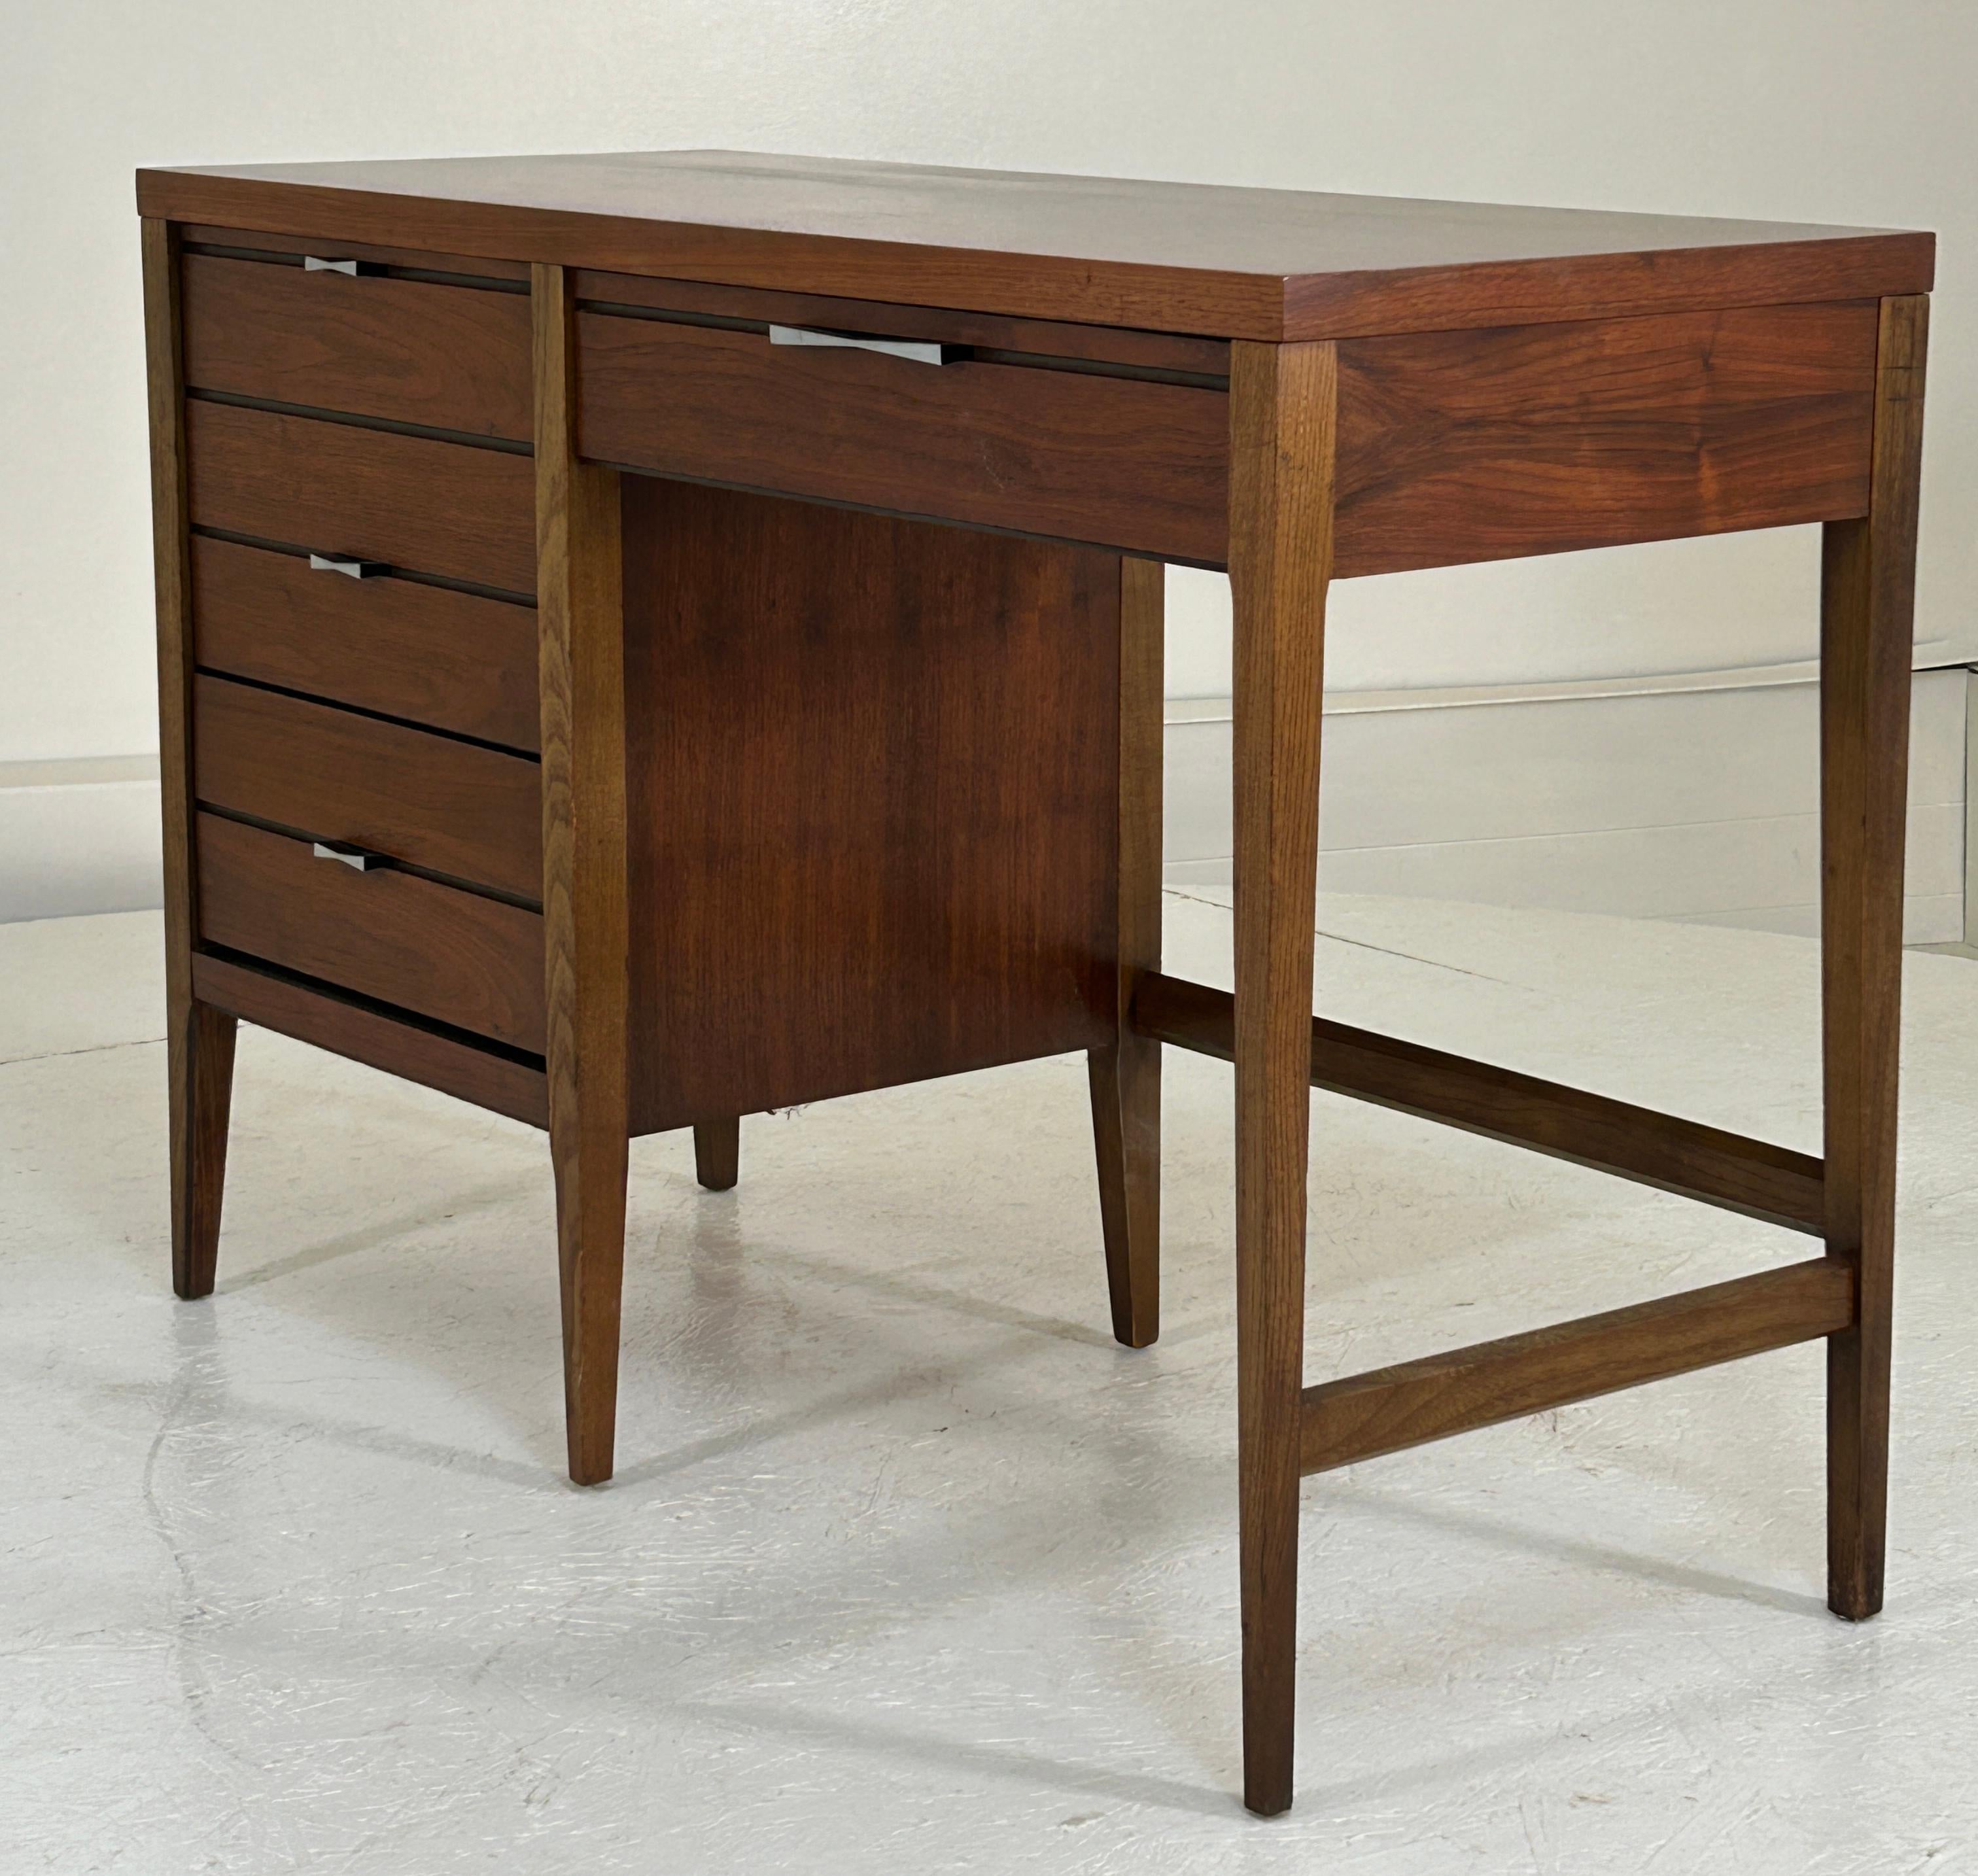 Mid-Century Modern Desk or Vanity by Lane, Tuxedo series with chair For Sale